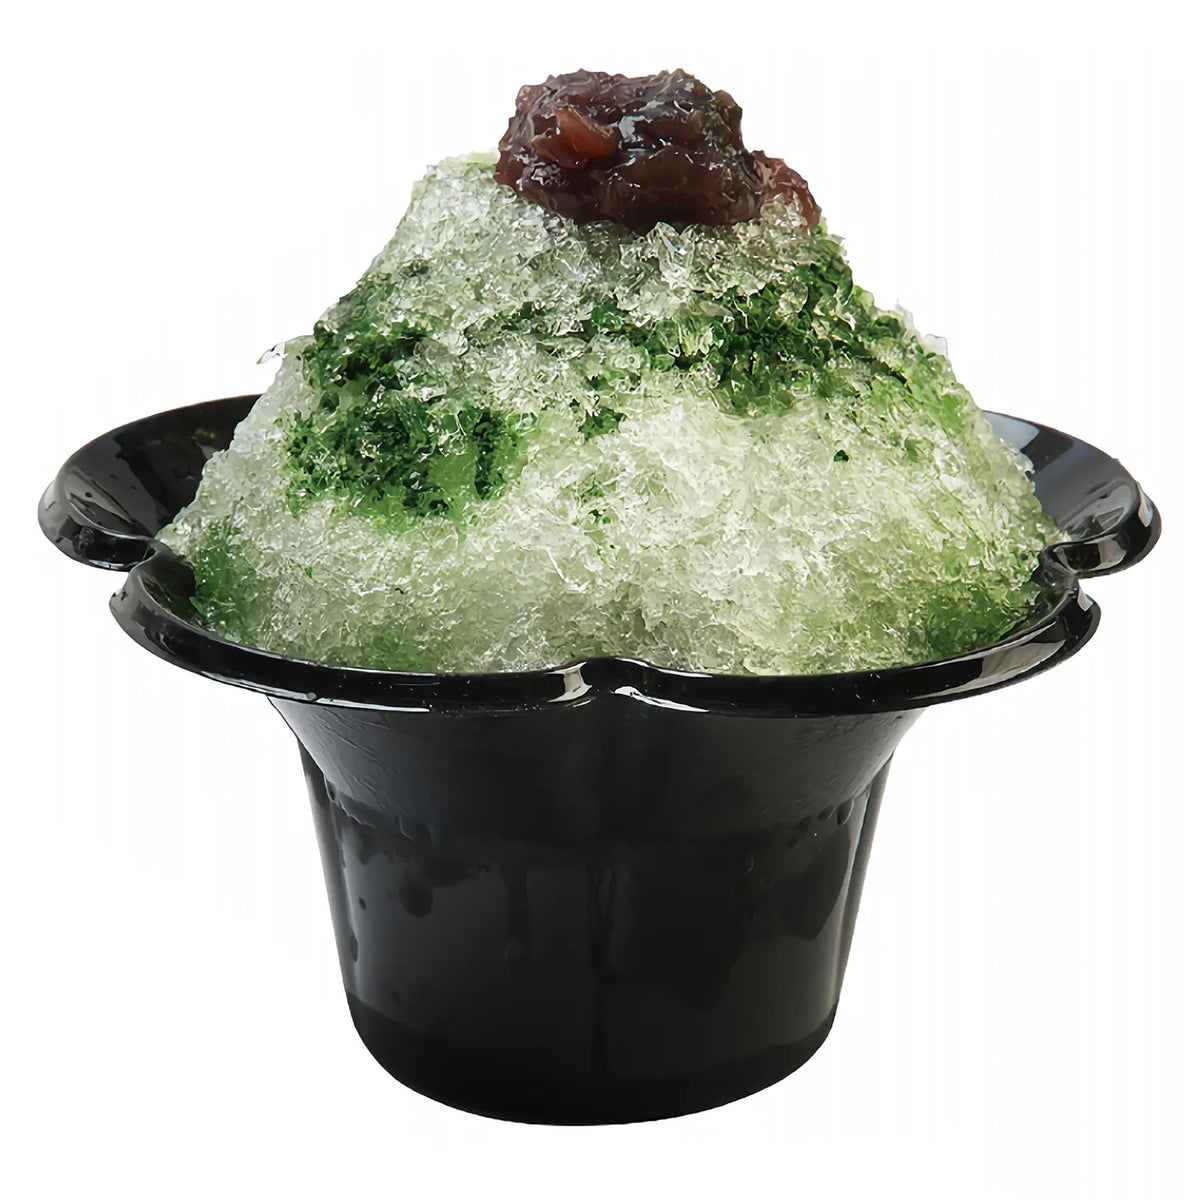 SUNNAP PET Shaved Ice Cup 80 pcs